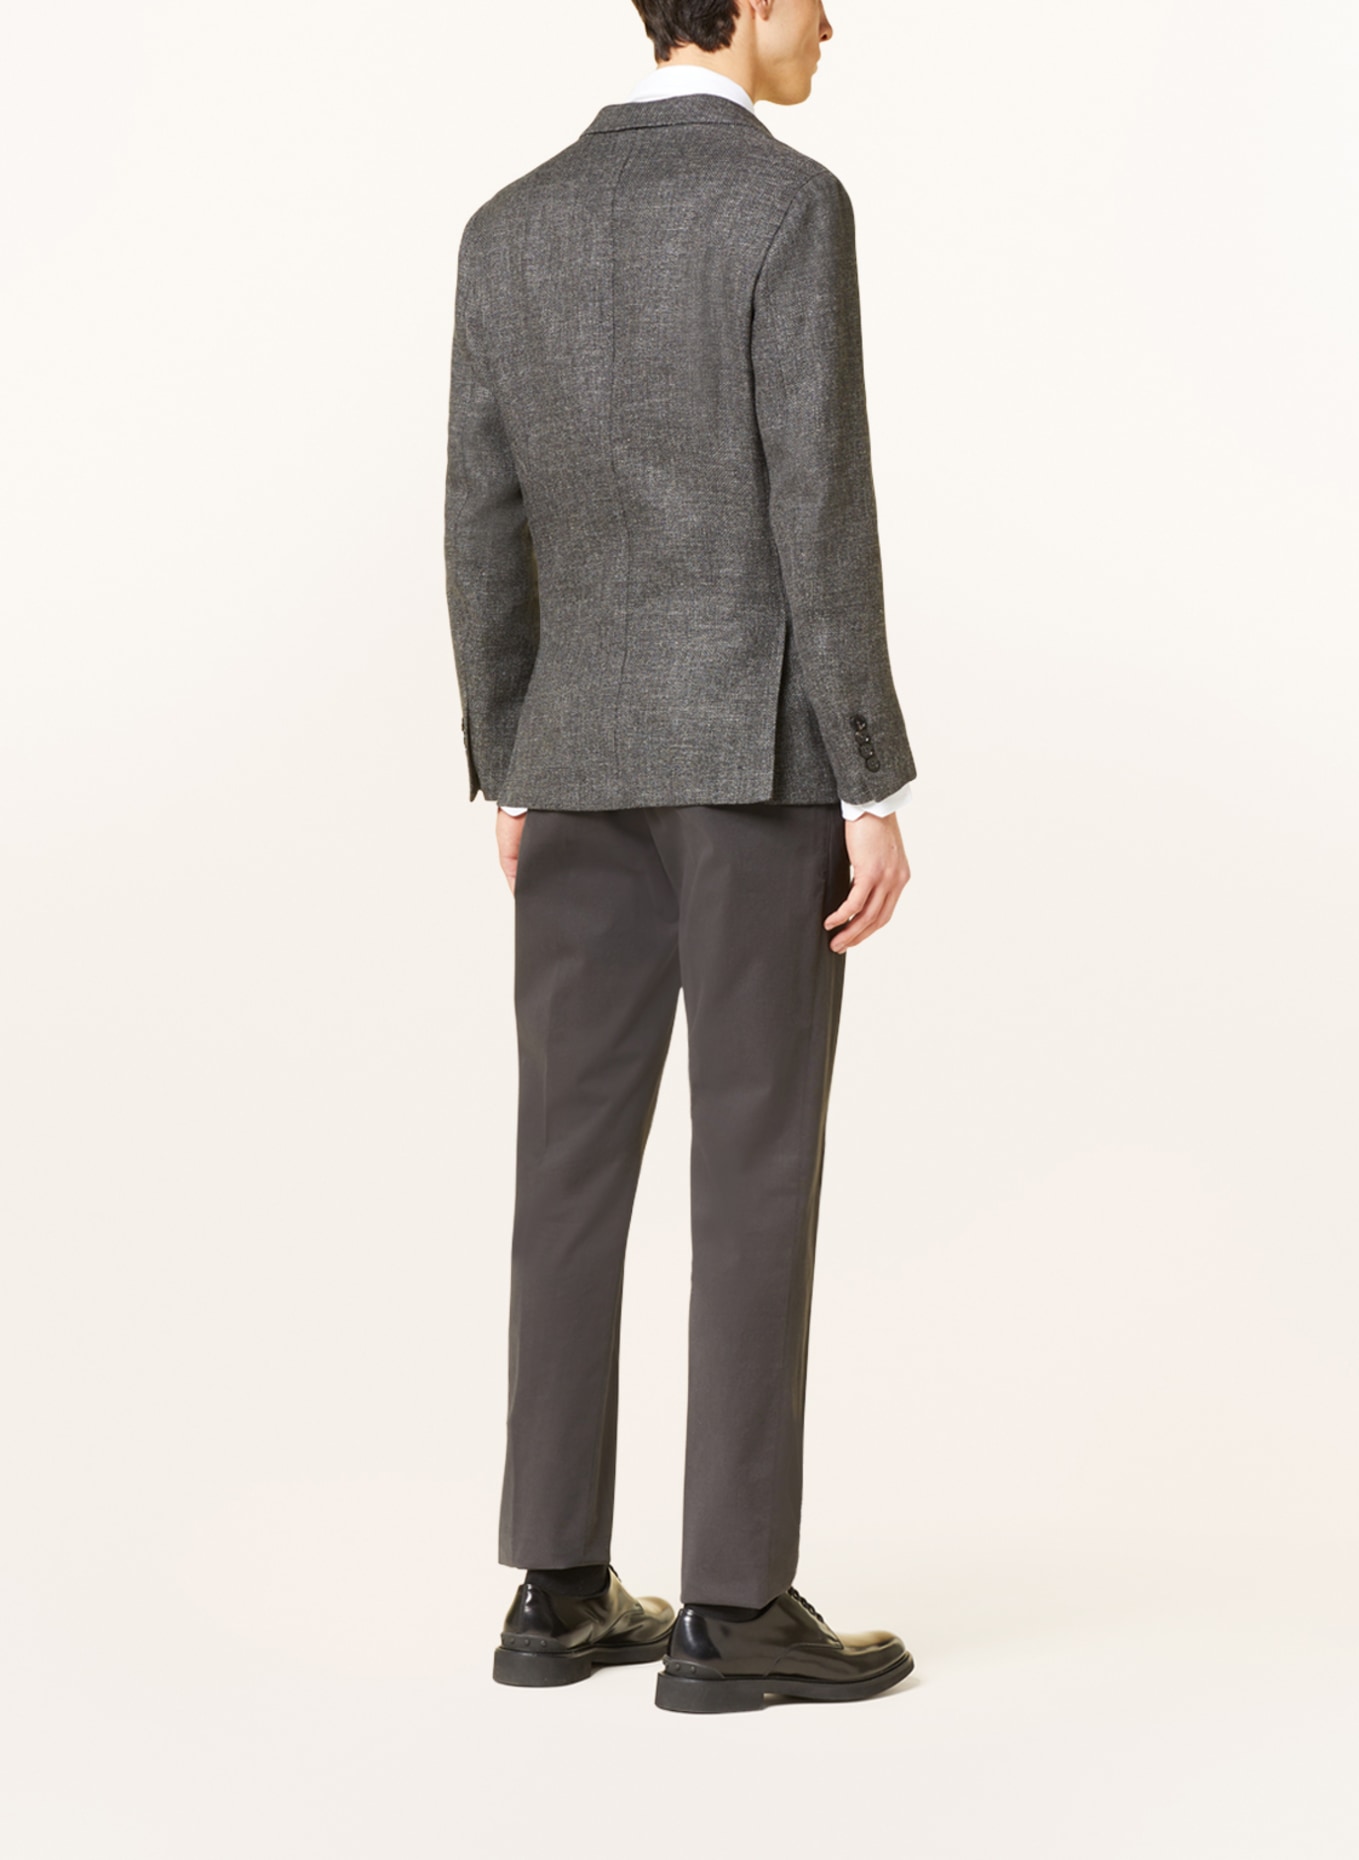 ZEGNA Tailored jacket extra slim fit with linen, Color: DARK GRAY (Image 3)